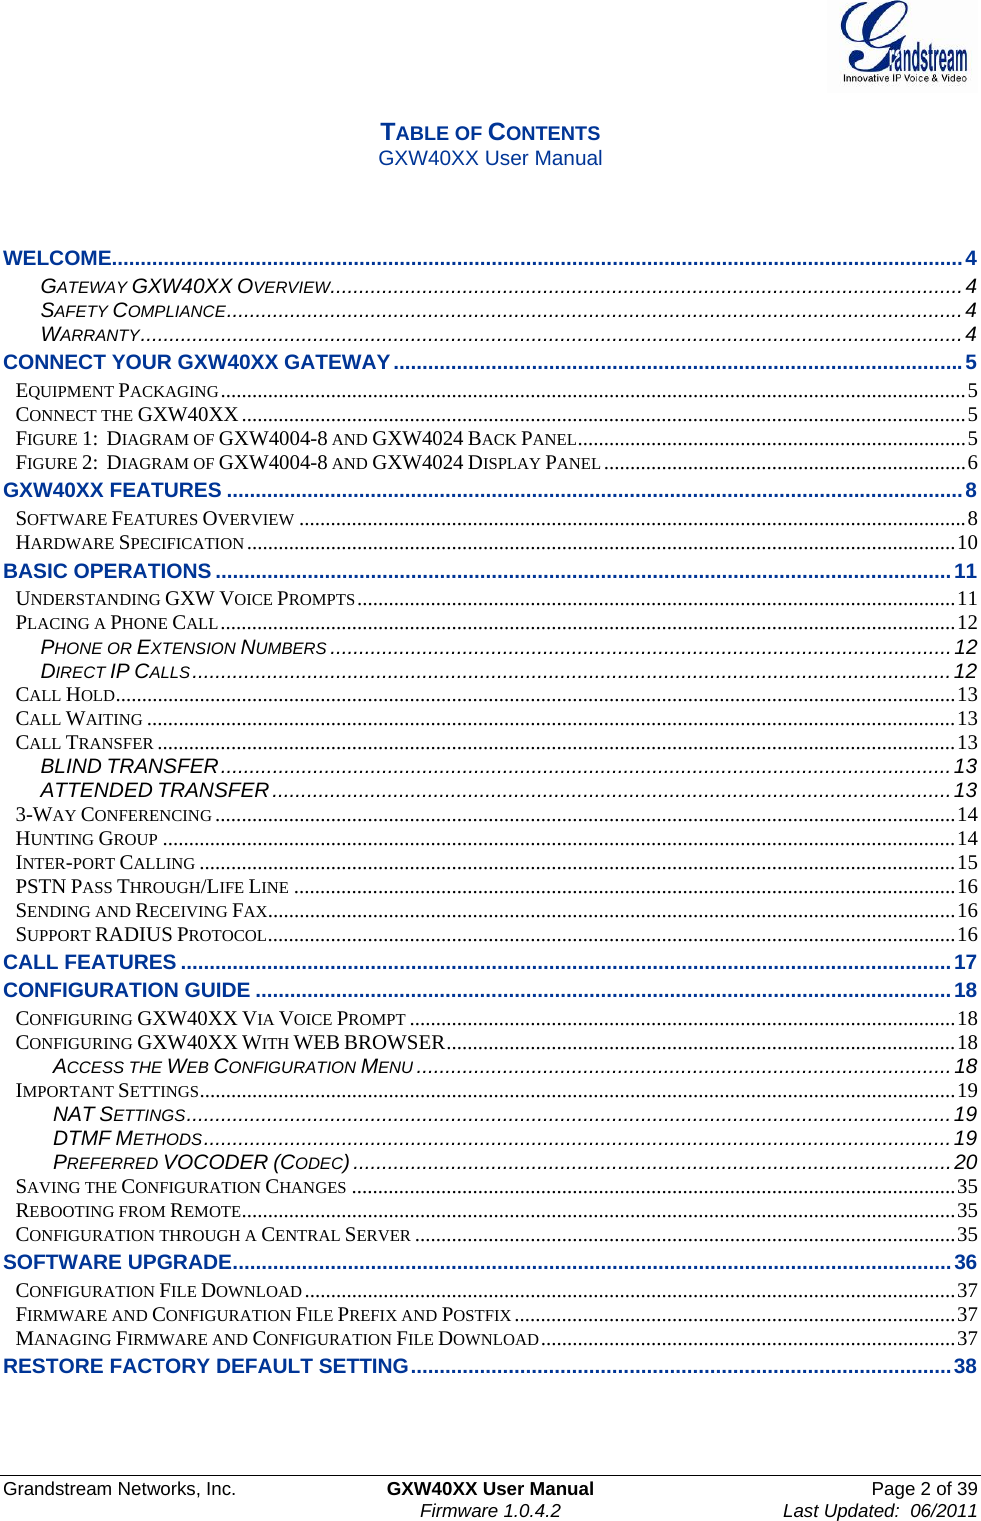  Grandstream Networks, Inc.  GXW40XX User Manual  Page 2 of 39    Firmware 1.0.4.2  Last Updated:  06/2011   TABLE OF CONTENTS GXW40XX User Manual    WELCOME.................................................................................................................................................... 4 GATEWAY GXW40XX OVERVIEW .............................................................................................................. 4 SAFETY COMPLIANCE ................................................................................................................................ 4 WARRANTY ............................................................................................................................................... 4 CONNECT YOUR GXW40XX GATEWAY ................................................................................................... 5 EQUIPMENT PACKAGING .............................................................................................................................................. 5 CONNECT THE GXW40XX .......................................................................................................................................... 5 FIGURE 1:  DIAGRAM OF GXW4004-8 AND GXW4024 BACK PANEL .......................................................................... 5 FIGURE 2:  DIAGRAM OF GXW4004-8 AND GXW4024 DISPLAY PANEL ..................................................................... 6 GXW40XX FEATURES ................................................................................................................................ 8 SOFTWARE FEATURES OVERVIEW ............................................................................................................................... 8 HARDWARE SPECIFICATION ....................................................................................................................................... 10 BASIC OPERATIONS ................................................................................................................................ 11 UNDERSTANDING GXW VOICE PROMPTS .................................................................................................................. 11 PLACING A PHONE CALL ............................................................................................................................................ 12 PHONE OR EXTENSION NUMBERS ............................................................................................................ 12 DIRECT IP CALLS .................................................................................................................................... 12 CALL HOLD ................................................................................................................................................................ 13 CALL WAITING .......................................................................................................................................................... 13 CALL TRANSFER ........................................................................................................................................................ 13 BLIND TRANSFER ............................................................................................................................... 13 ATTENDED TRANSFER ...................................................................................................................... 13 3-WAY CONFERENCING ............................................................................................................................................. 14 HUNTING GROUP ....................................................................................................................................................... 14 INTER-PORT CALLING ................................................................................................................................................ 15 PSTN PASS THROUGH/LIFE LINE .............................................................................................................................. 16 SENDING AND RECEIVING FAX................................................................................................................................... 16 SUPPORT RADIUS PROTOCOL ................................................................................................................................... 16 CALL FEATURES ...................................................................................................................................... 17 CONFIGURATION GUIDE ......................................................................................................................... 18 CONFIGURING GXW40XX VIA VOICE PROMPT ........................................................................................................ 18 CONFIGURING GXW40XX WITH WEB BROWSER ................................................................................................. 18 ACCESS THE WEB CONFIGURATION MENU ............................................................................................. 18 IMPORTANT SETTINGS ................................................................................................................................................ 19 NAT SETTINGS ..................................................................................................................................... 19 DTMF METHODS .................................................................................................................................. 19 PREFERRED VOCODER (CODEC) ........................................................................................................ 20 SAVING THE CONFIGURATION CHANGES ................................................................................................................... 35 REBOOTING FROM REMOTE ........................................................................................................................................ 35 CONFIGURATION THROUGH A CENTRAL SERVER ....................................................................................................... 35 SOFTWARE UPGRADE ............................................................................................................................. 36 CONFIGURATION FILE DOWNLOAD ............................................................................................................................ 37 FIRMWARE AND CONFIGURATION FILE PREFIX AND POSTFIX .................................................................................... 37 MANAGING FIRMWARE AND CONFIGURATION FILE DOWNLOAD ............................................................................... 37 RESTORE FACTORY DEFAULT SETTING .............................................................................................. 38    